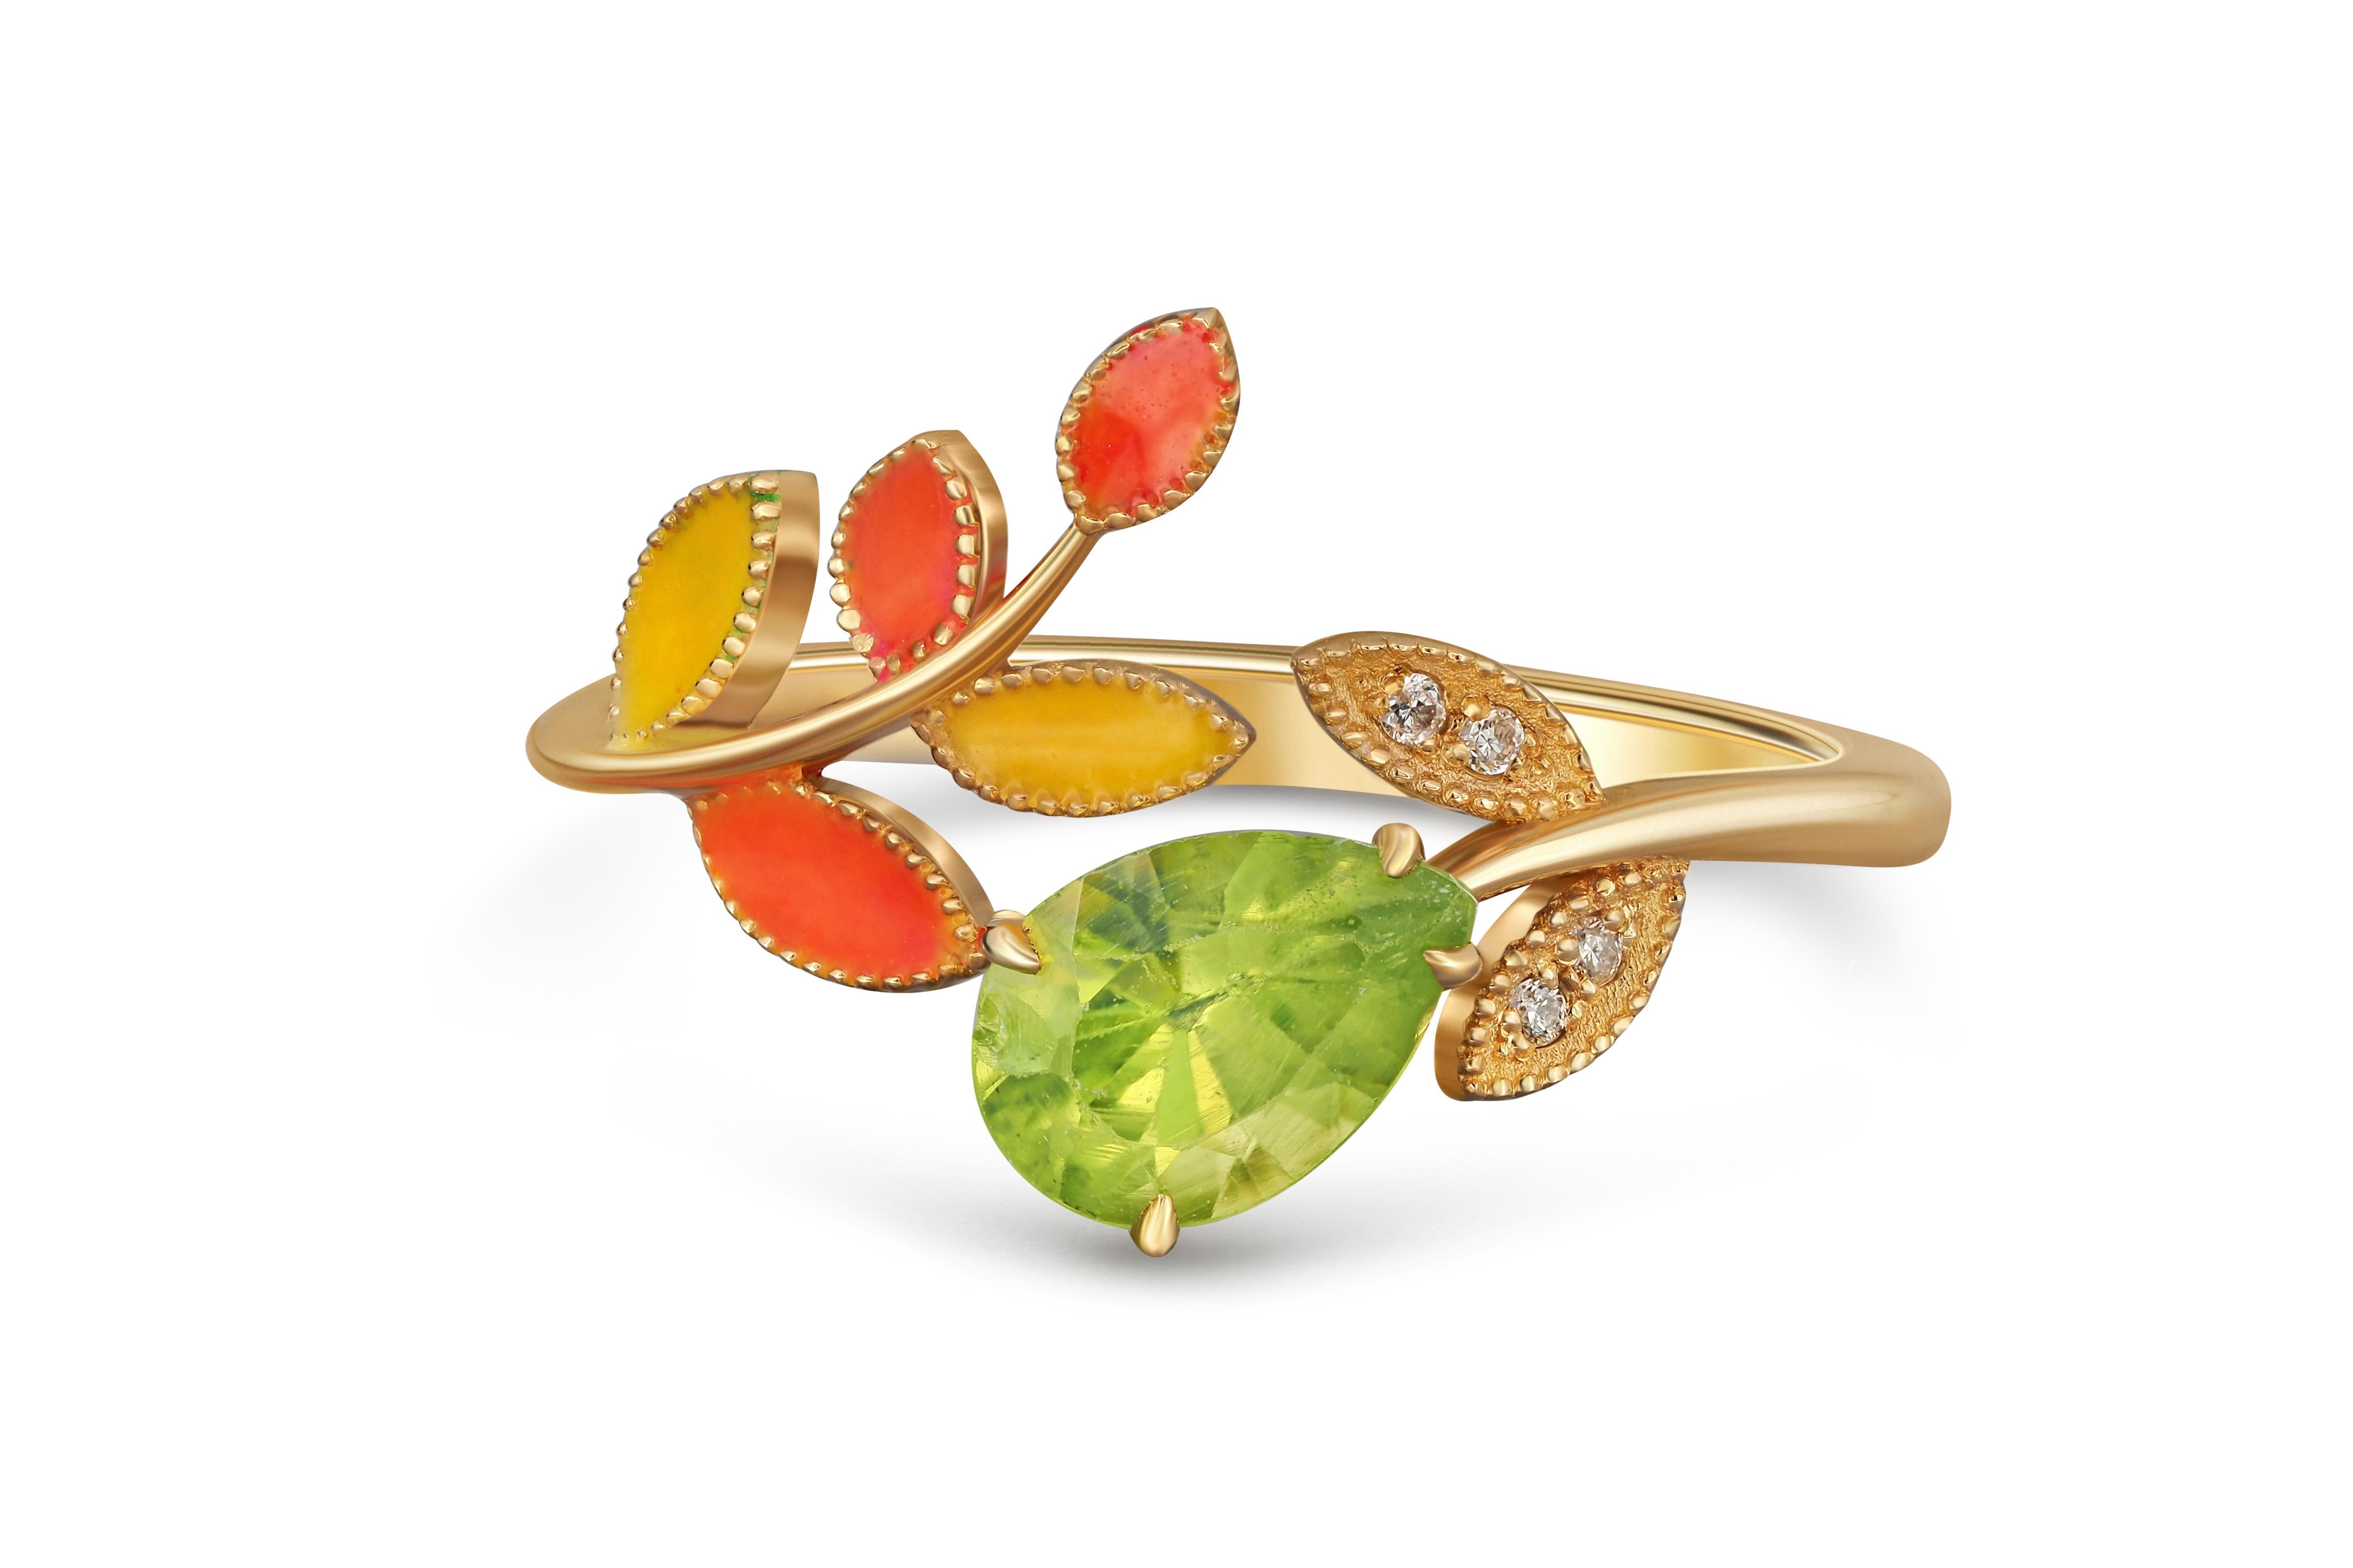 Flower ring with peridot. 
Pear peridot 14k gold ring. Open ended ring. August birthstone ring. Vintage enamel peridot ring. Gold leaves ring.

Metal: 14k gold
Weight: 2.4 g. depends from size.

Set with peridot:
Pear shape, approx 0.9 ct (7.5x5.5